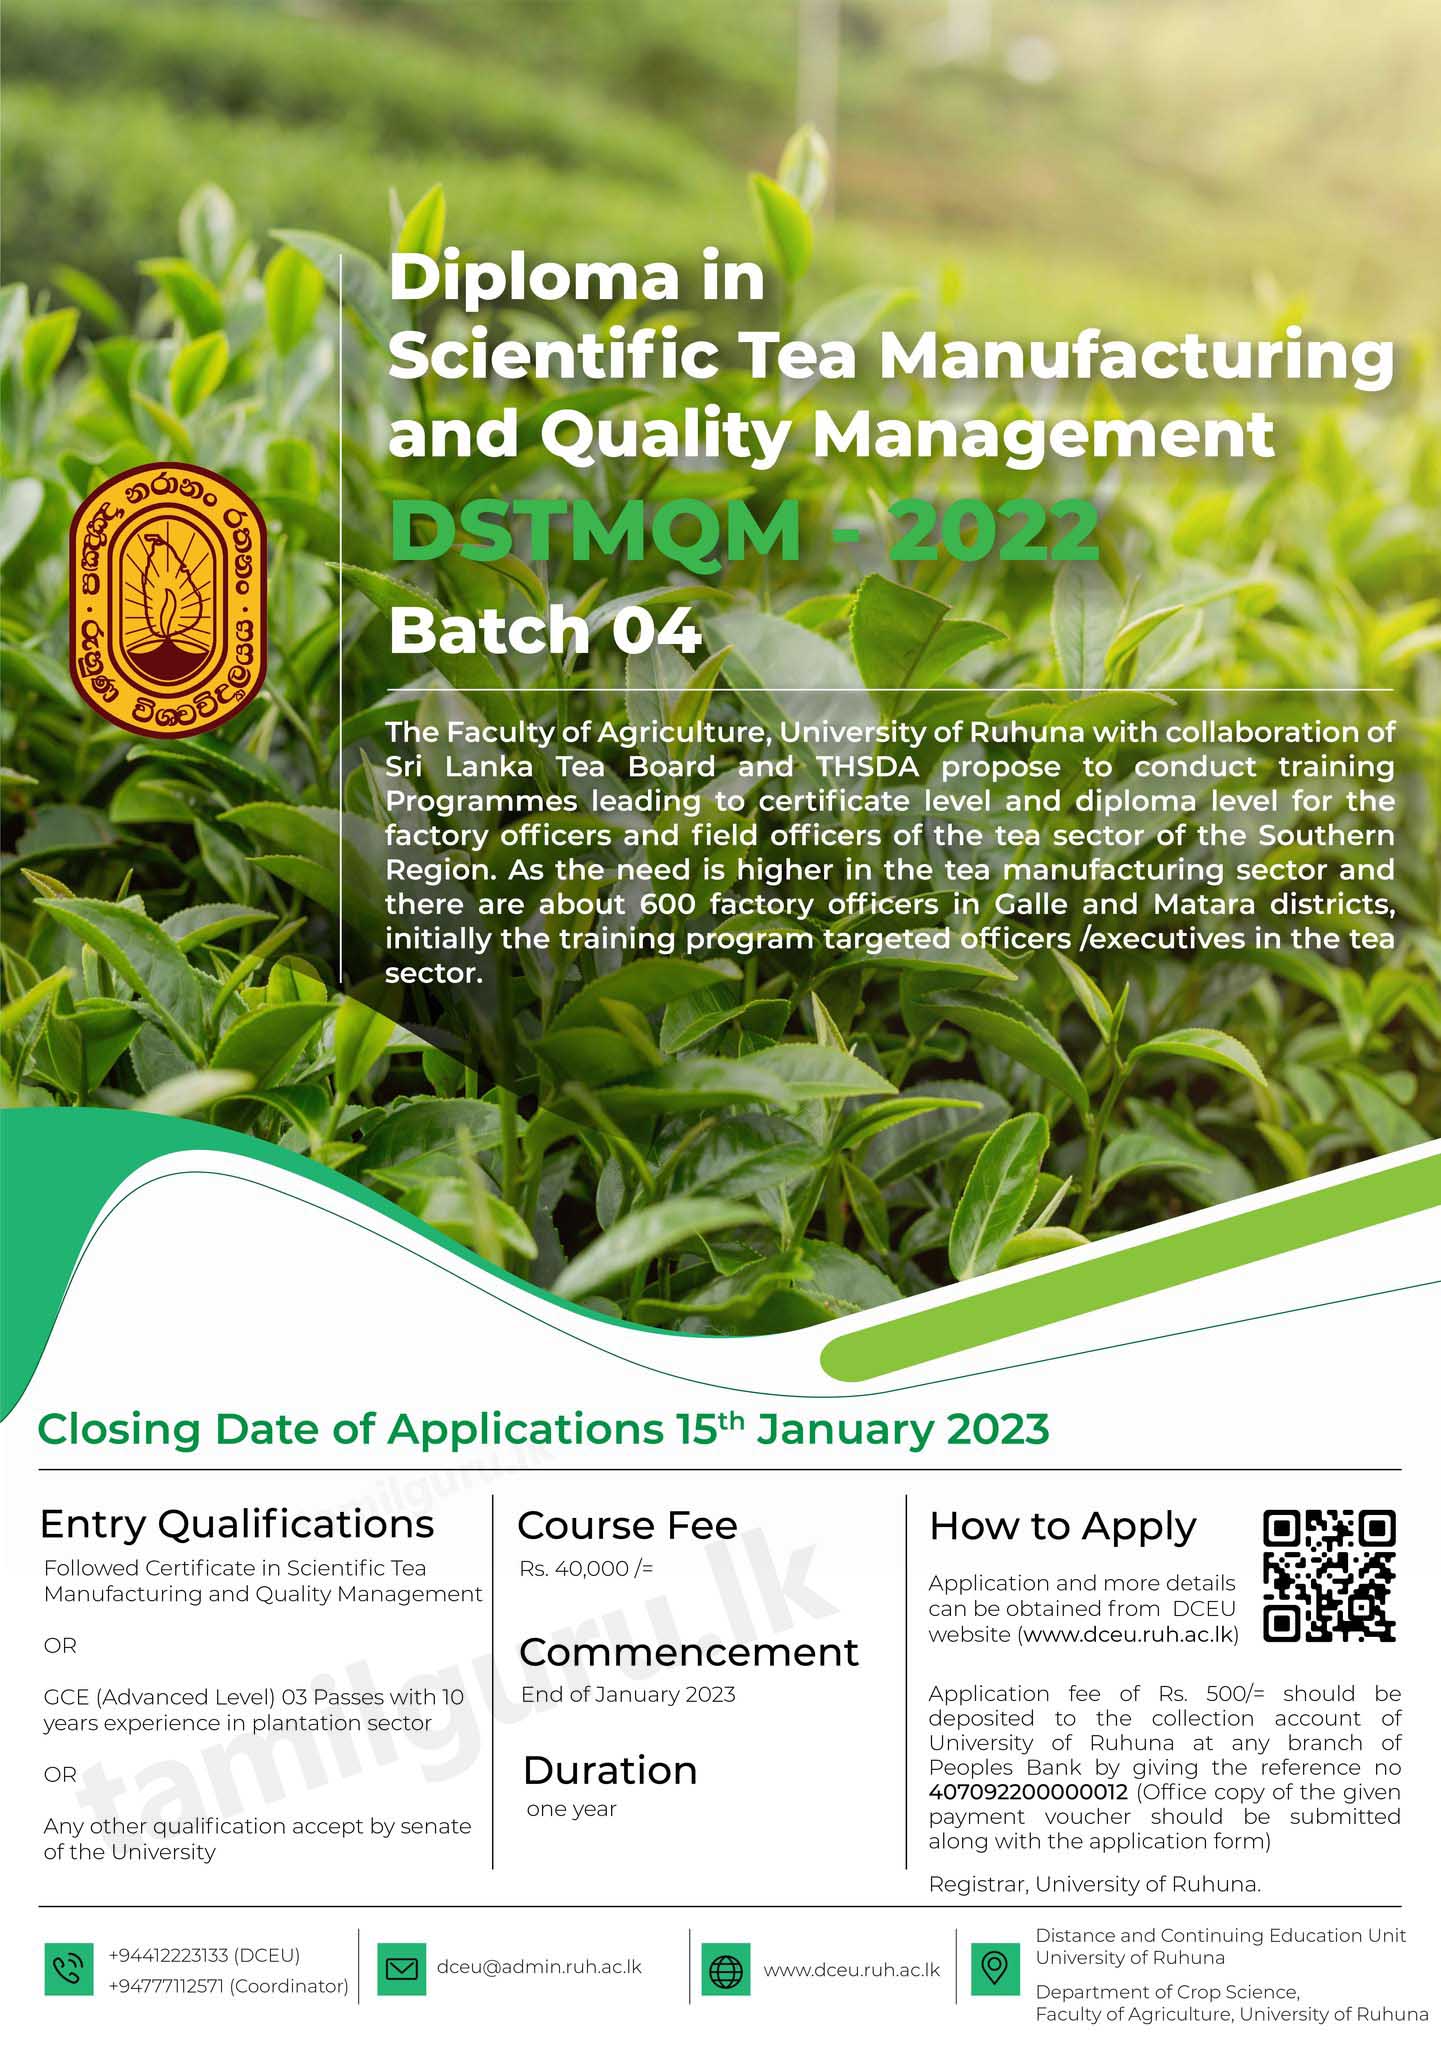 Diploma in Scientific Tea Manufacturing and Quality Management 2022/2023 - University of Ruhuna